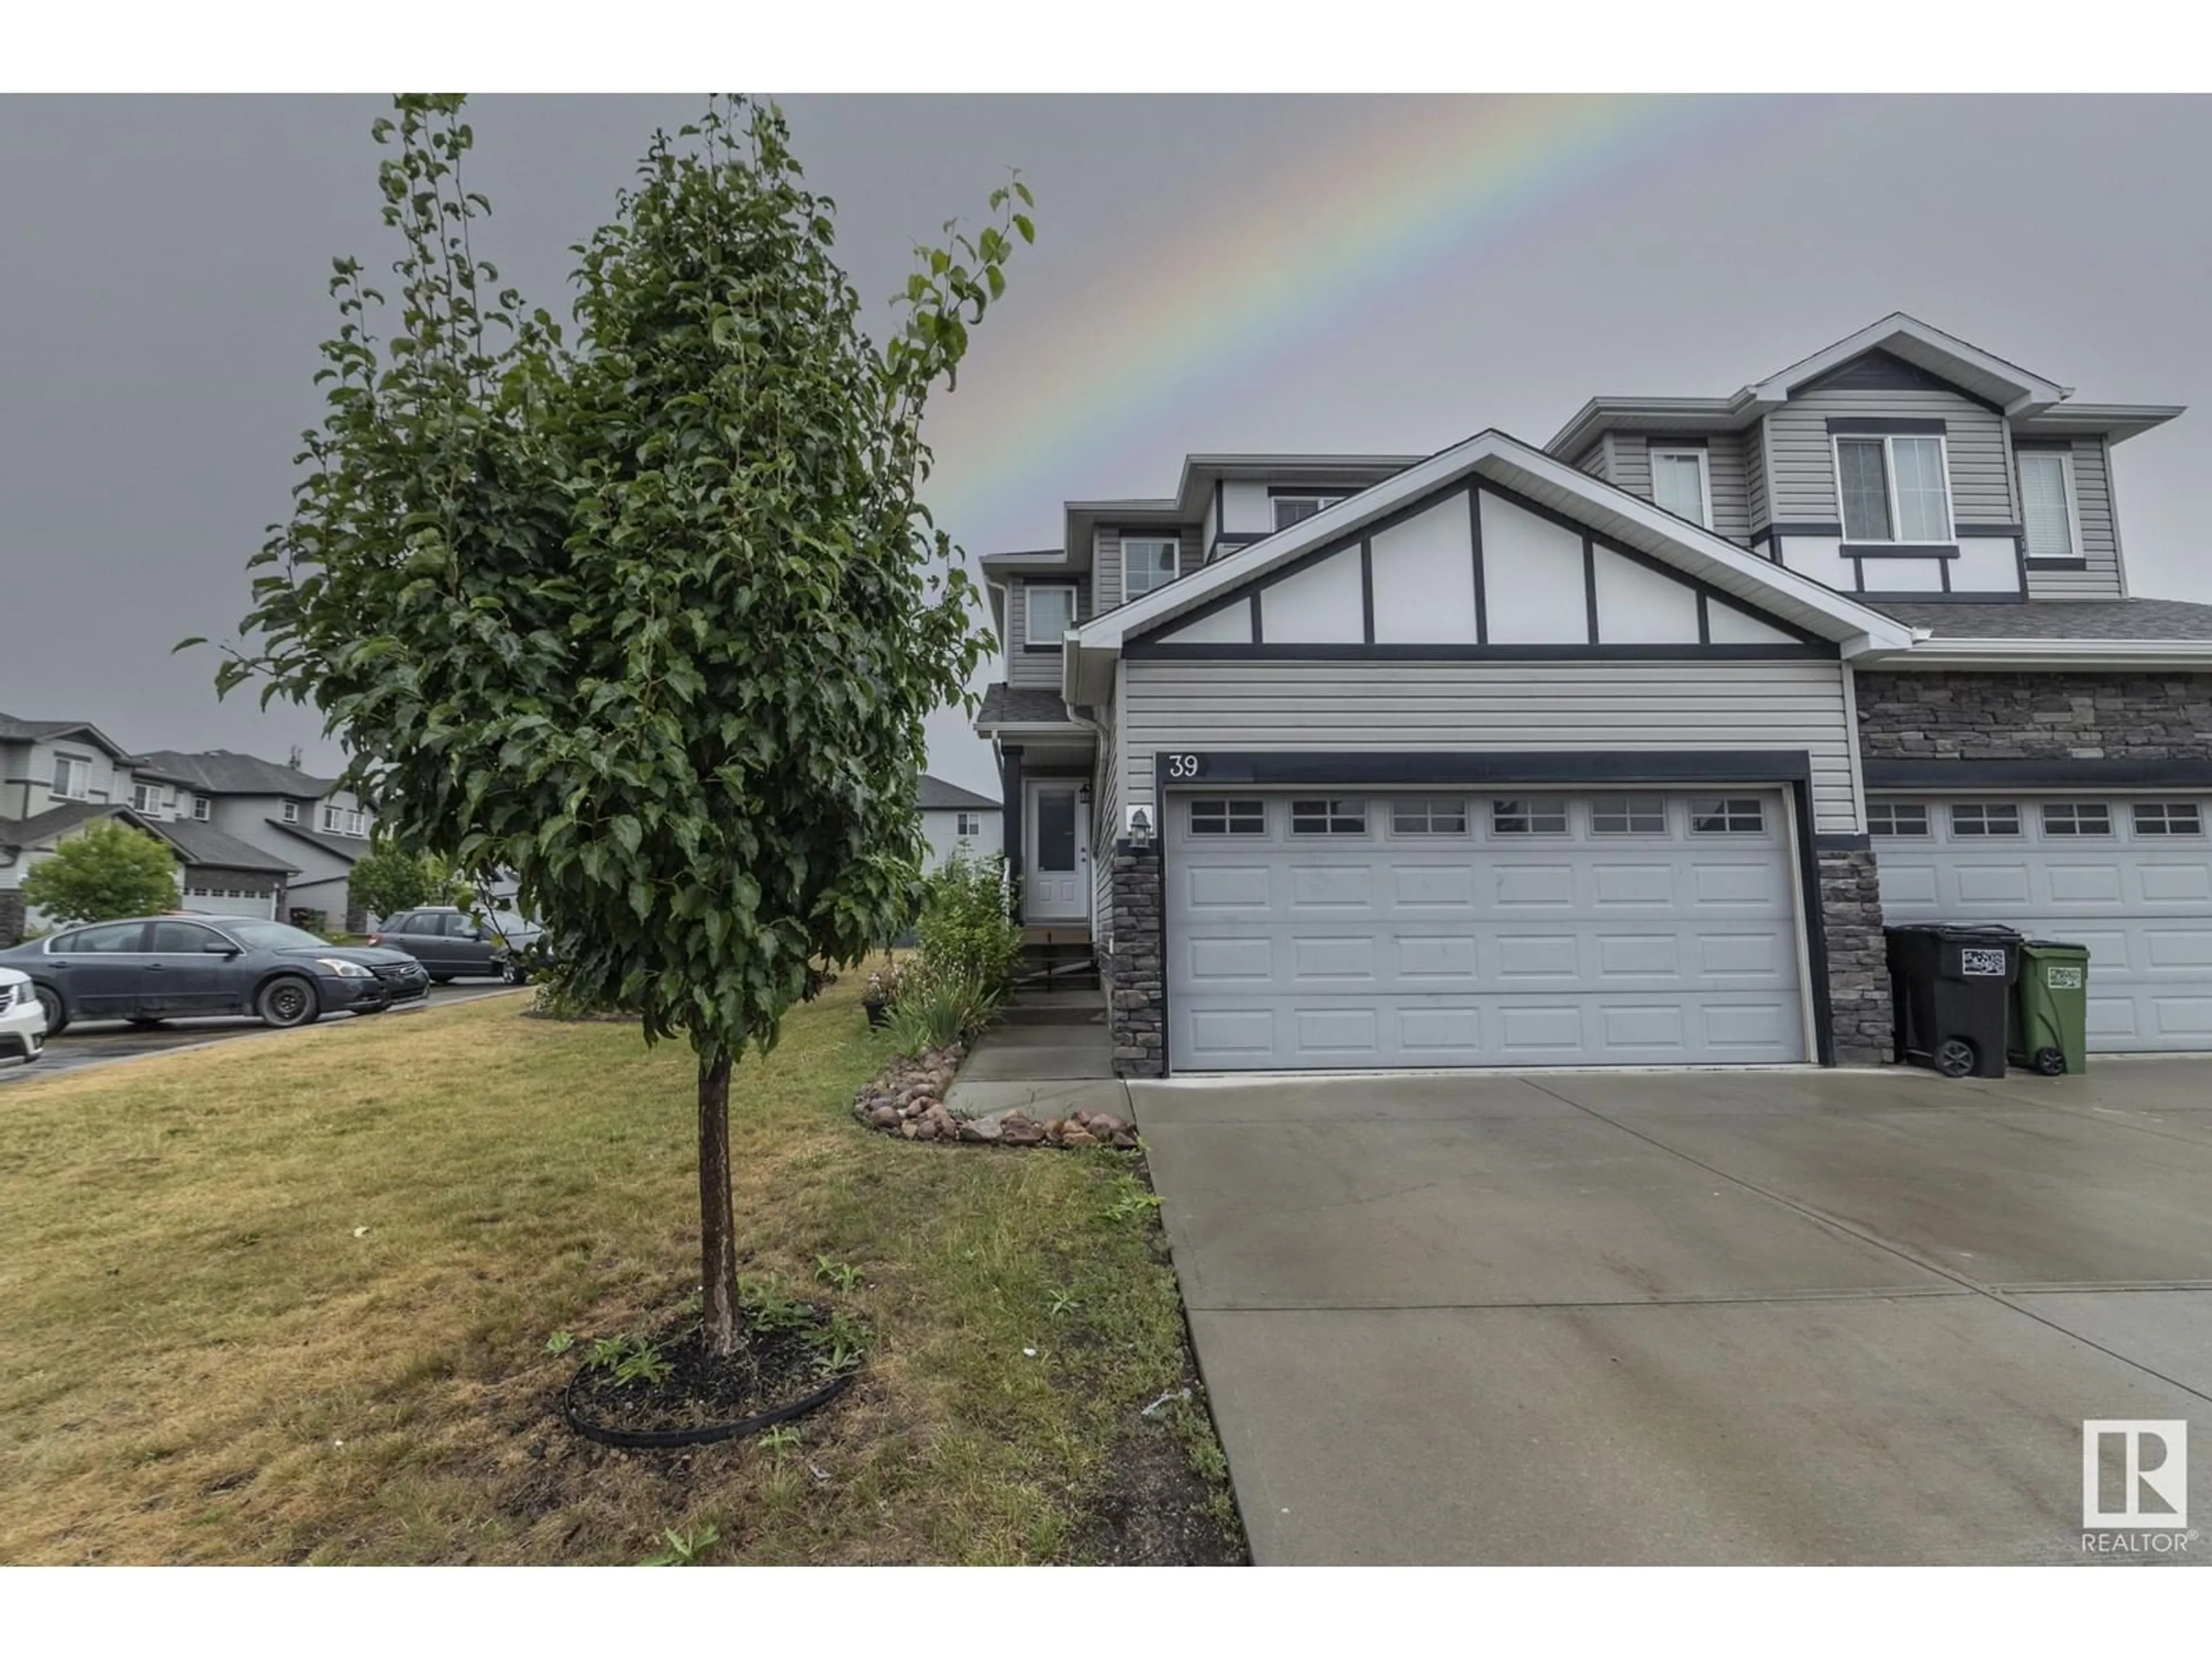 A pic from exterior of the house or condo for #39 9350 211 ST NW, Edmonton Alberta T5T4T8